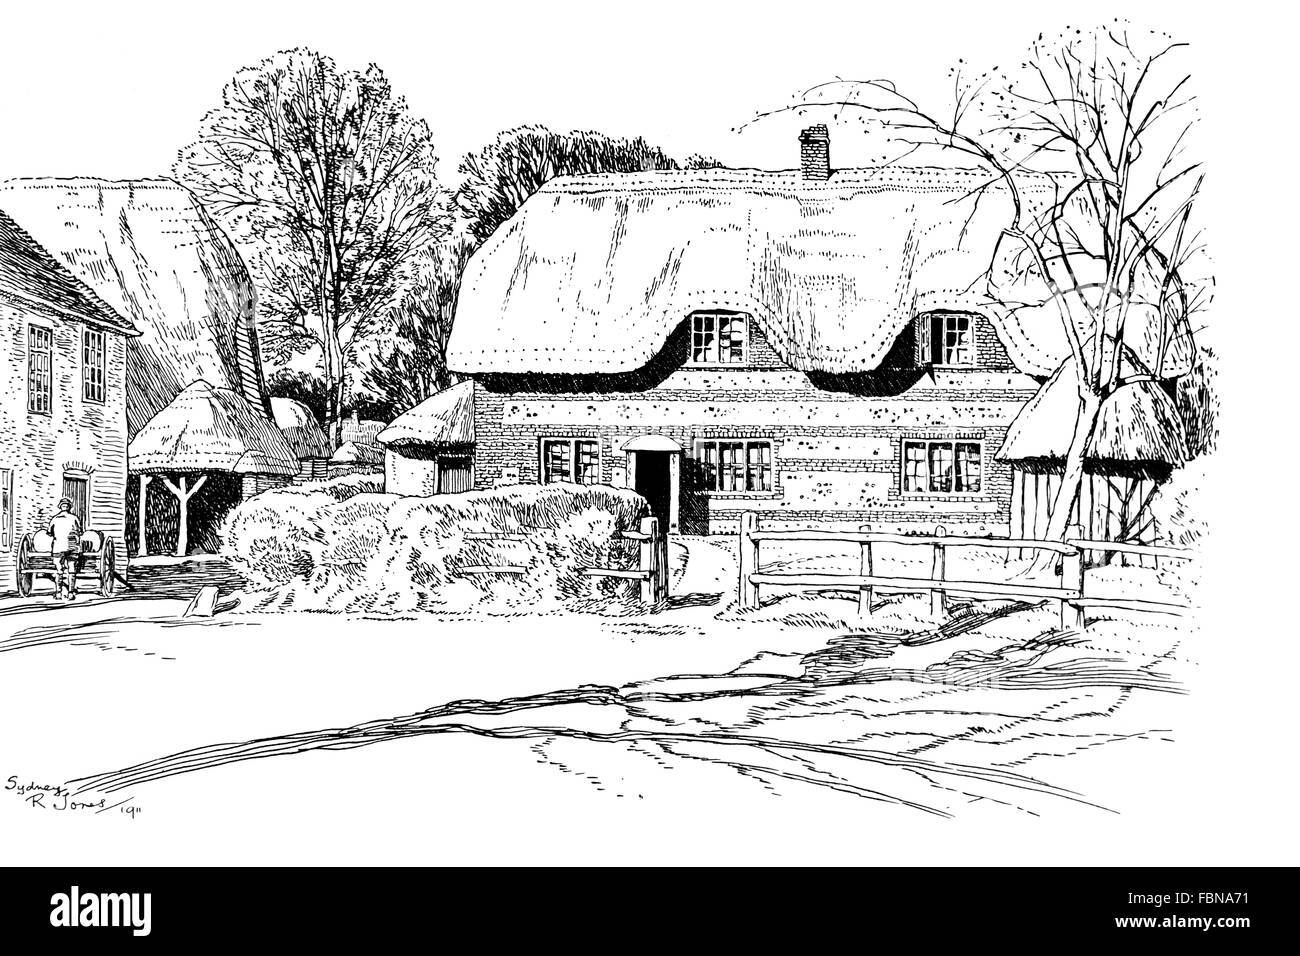 UK, England, Wiltshire, Winterbourne Earls old brick and stone thatched farmhouse, 1911 line illustration by Sydney R Jones Stock Photo